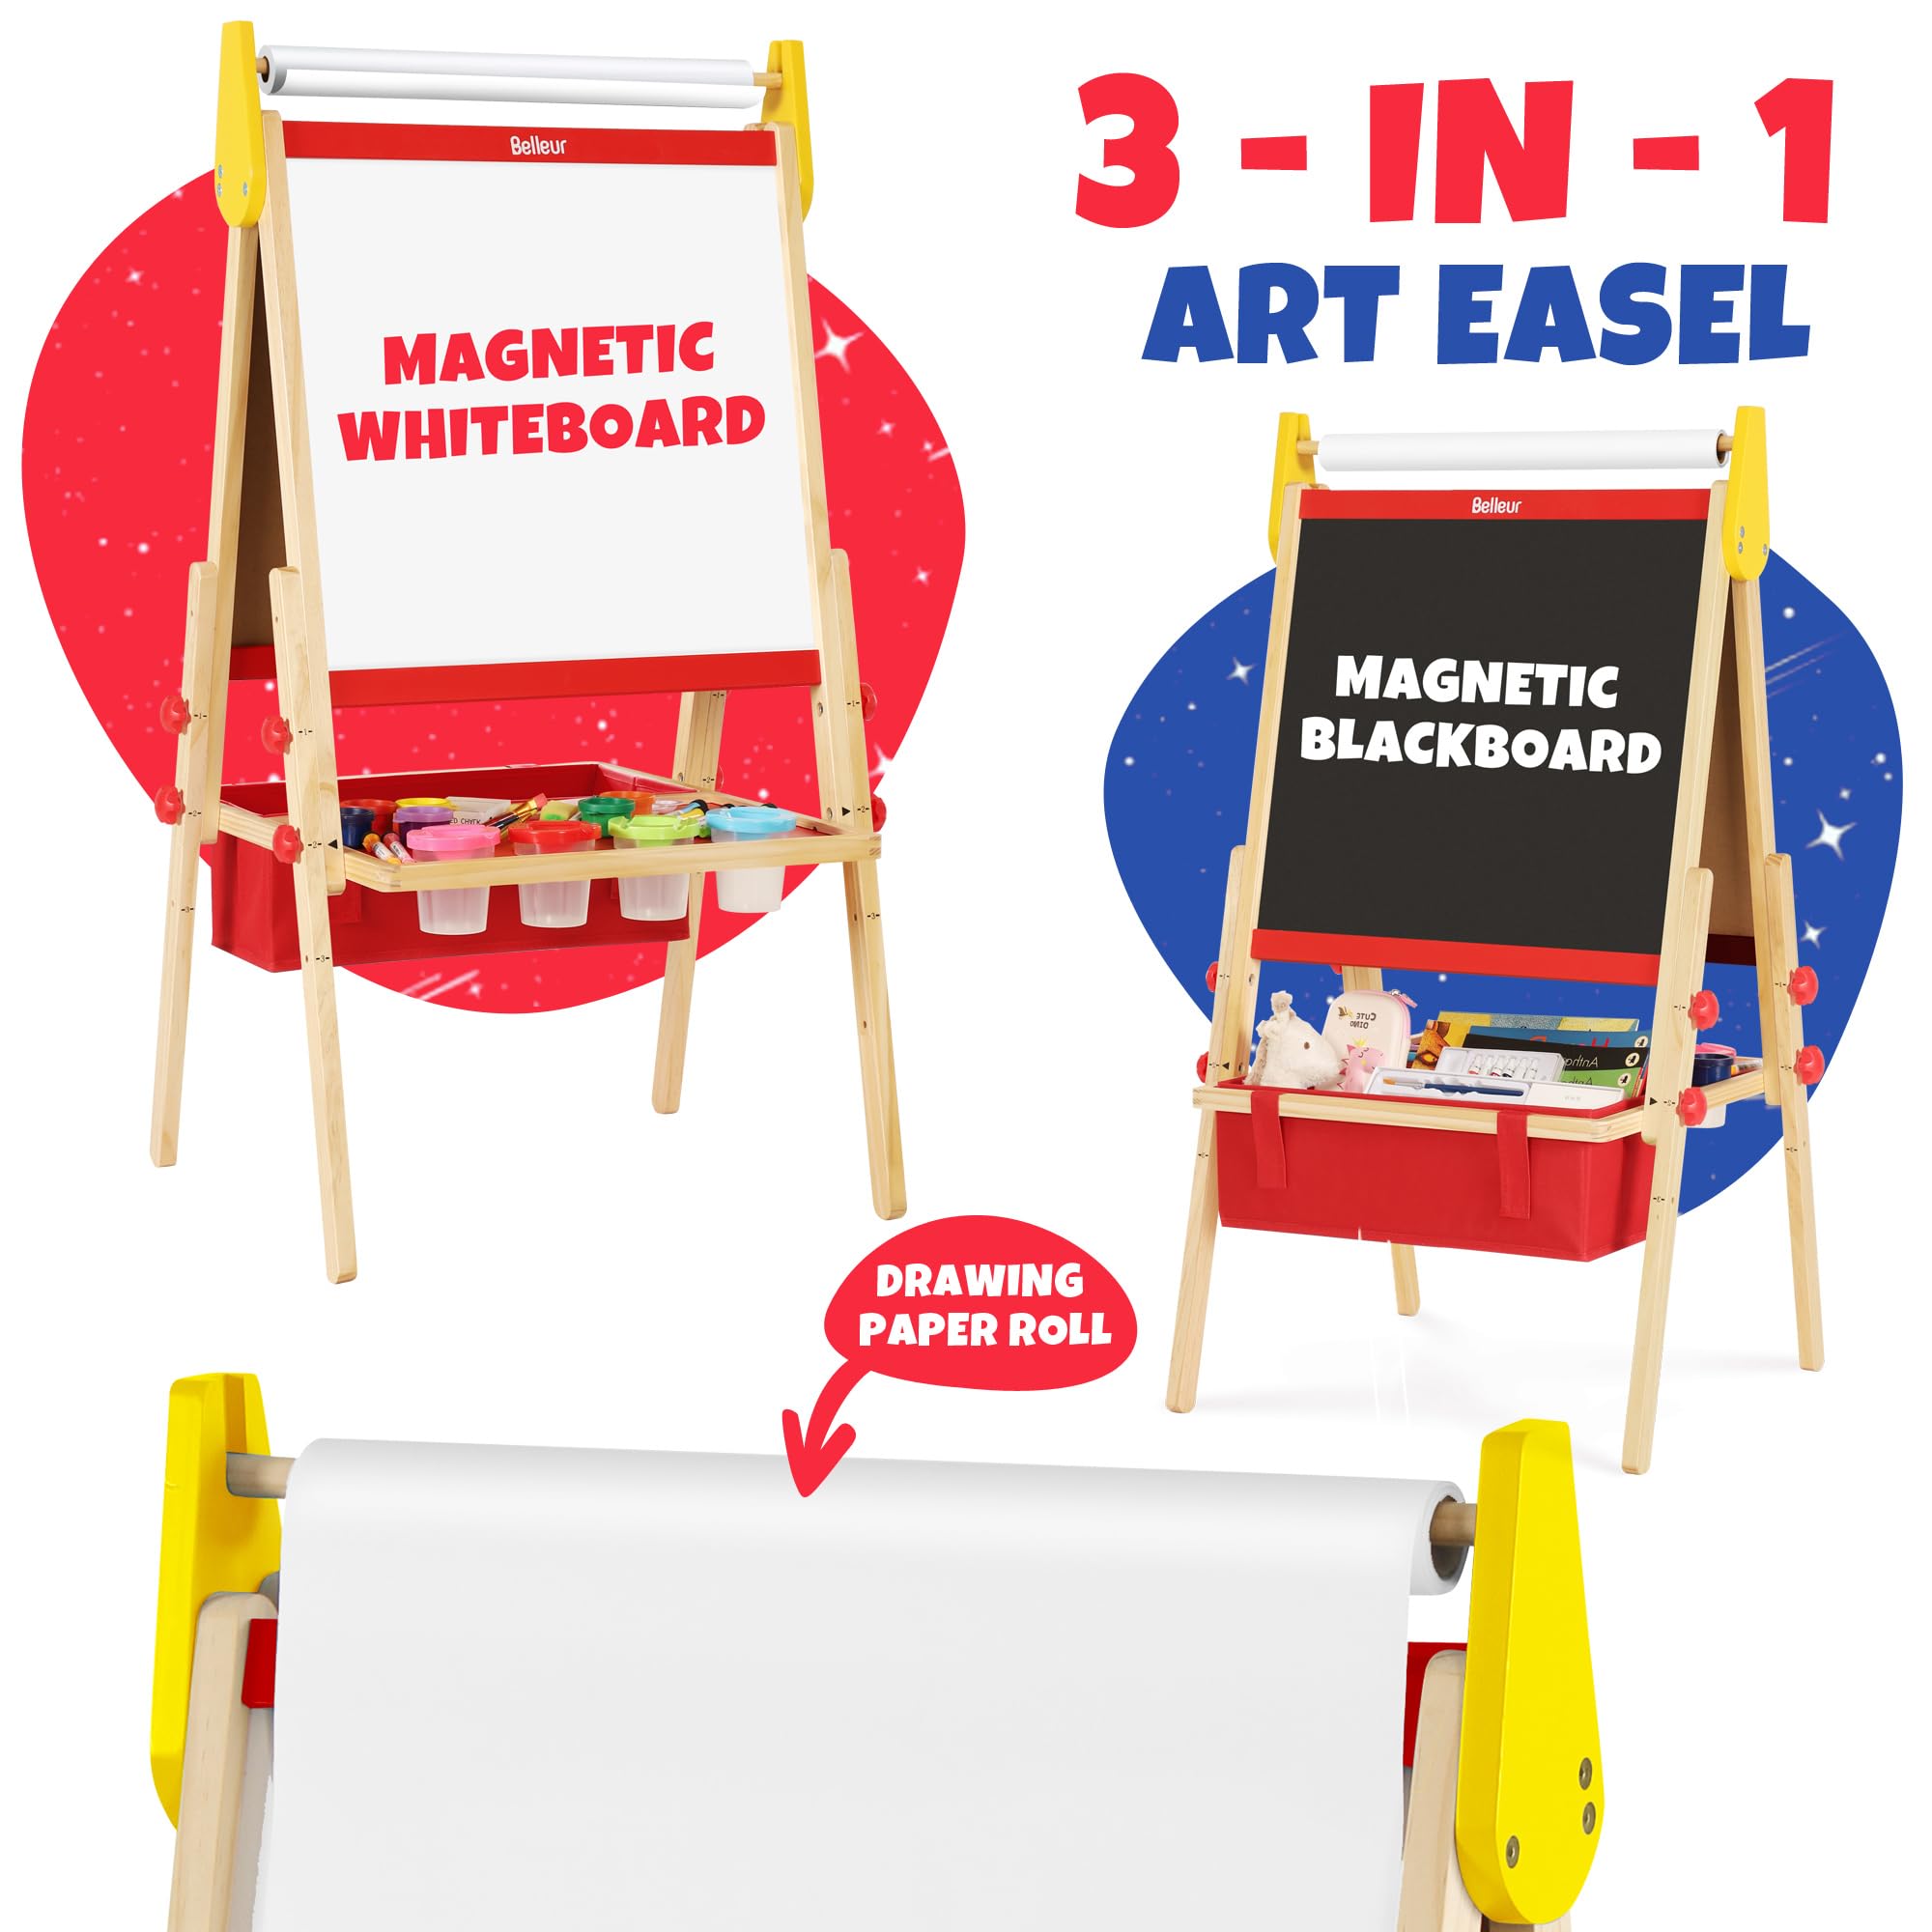 Belleur All-in-One Art Easel for Kid-100+ Accessories, Double-Sided Wooden Kid Easel with Chalkboard & Whiteboard, Finger Paints, Adjustable Art Kid Easel with Paper Roll for Toddler 2-8